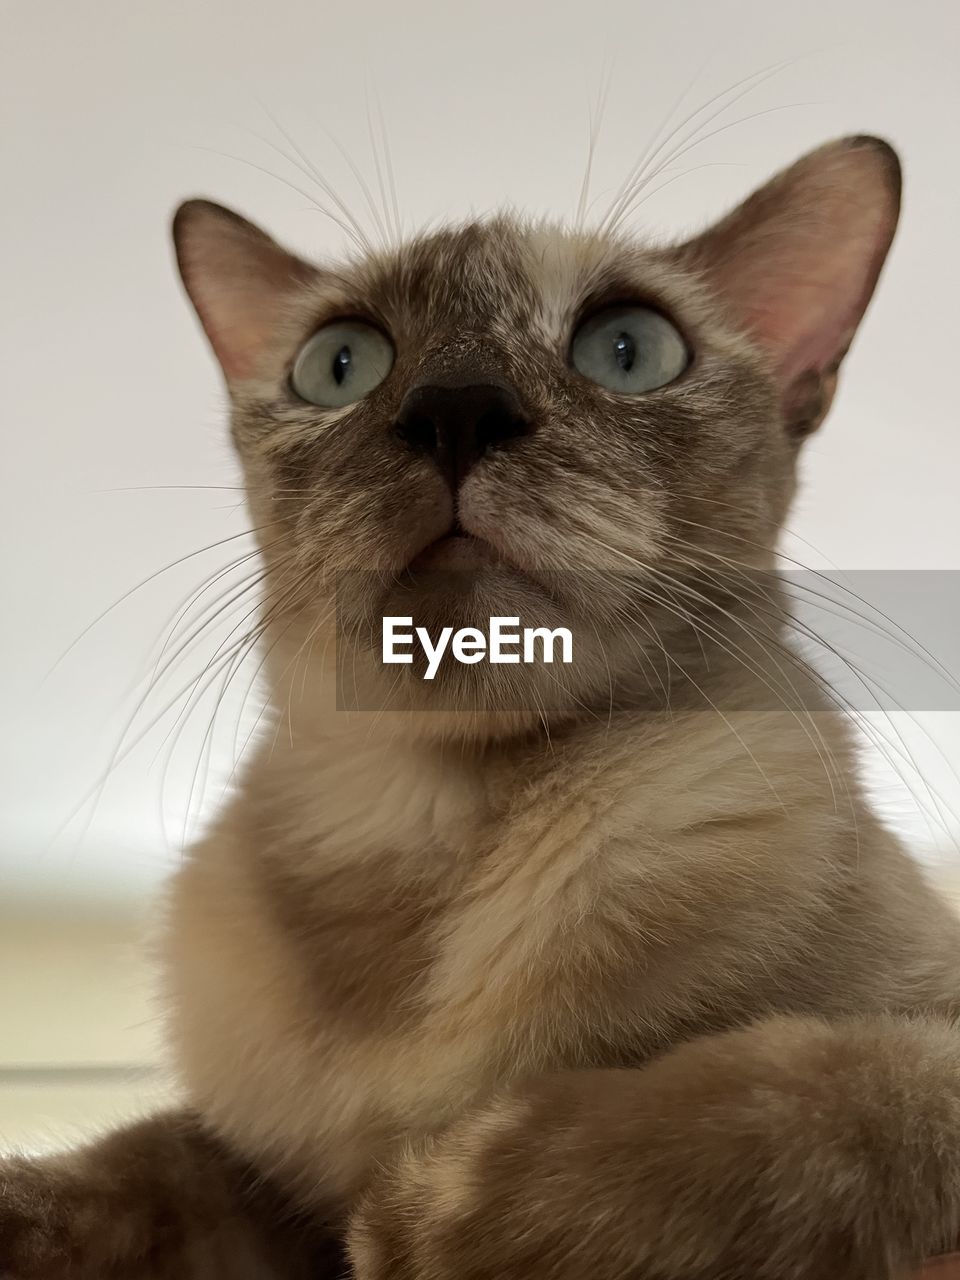 animal themes, animal, mammal, pet, one animal, cat, domestic animals, domestic cat, feline, nose, whiskers, animal body part, close-up, felidae, small to medium-sized cats, animal hair, indoors, carnivore, eye, portrait, no people, animal head, looking, siamese, cute, animal eye